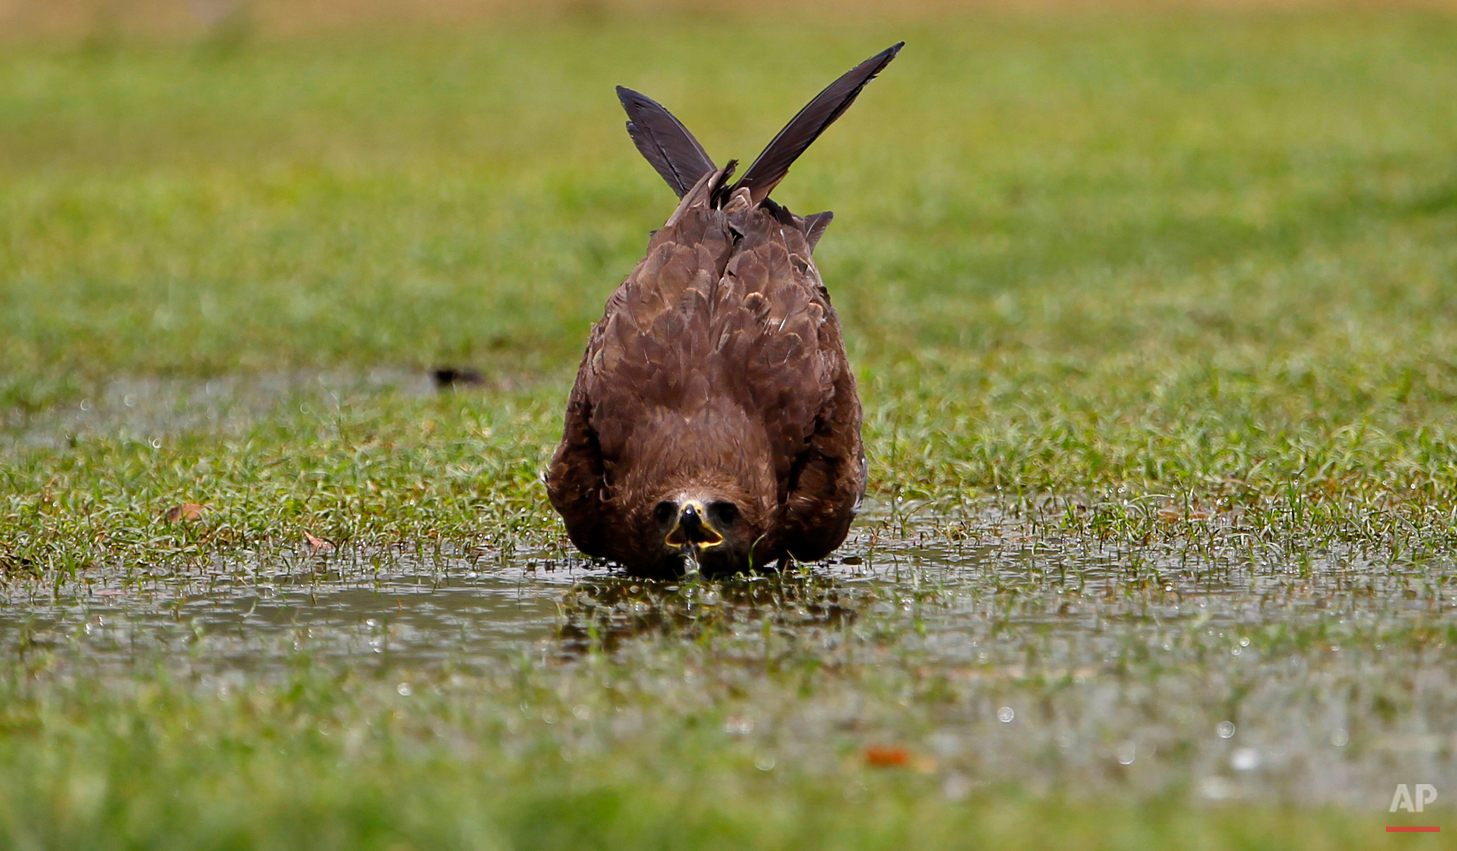  A kite bird drinks water from a puddle in a public lawn in New Delhi, India, Friday, June 1, 2012. The weather in northern India has been extremely hot in recent days with temperatures reaching as high as 45 degrees Celsius, or 113 degrees Fahrenhei